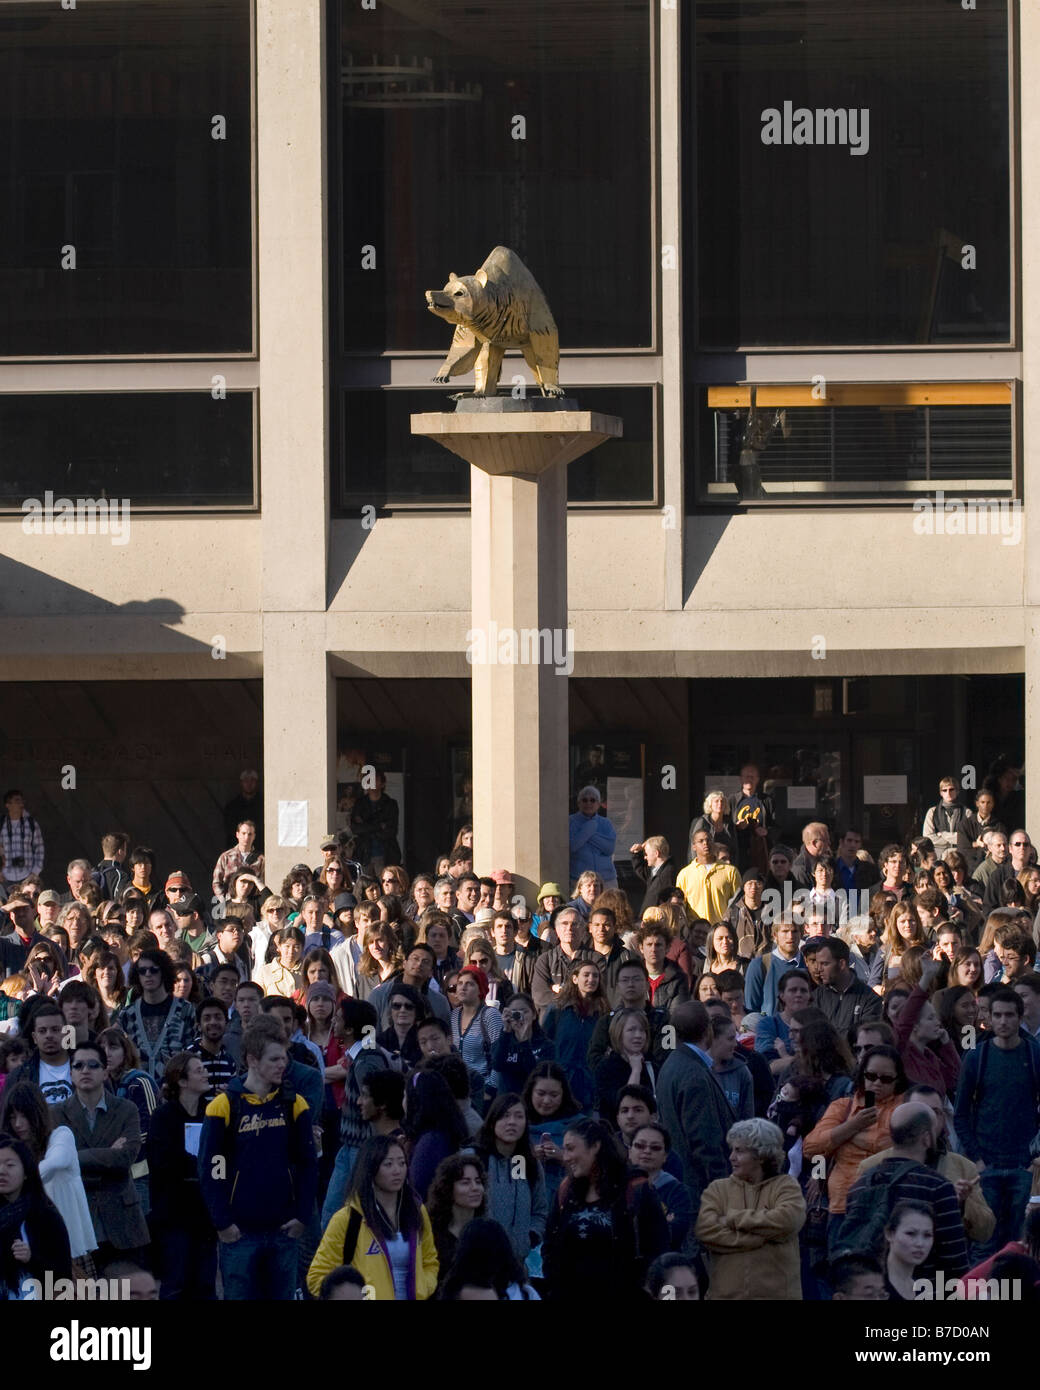 The inaugural watching crowd in front of Zellerbach Hall's Cal Bear statue at the University of California at Berkeley. Stock Photo